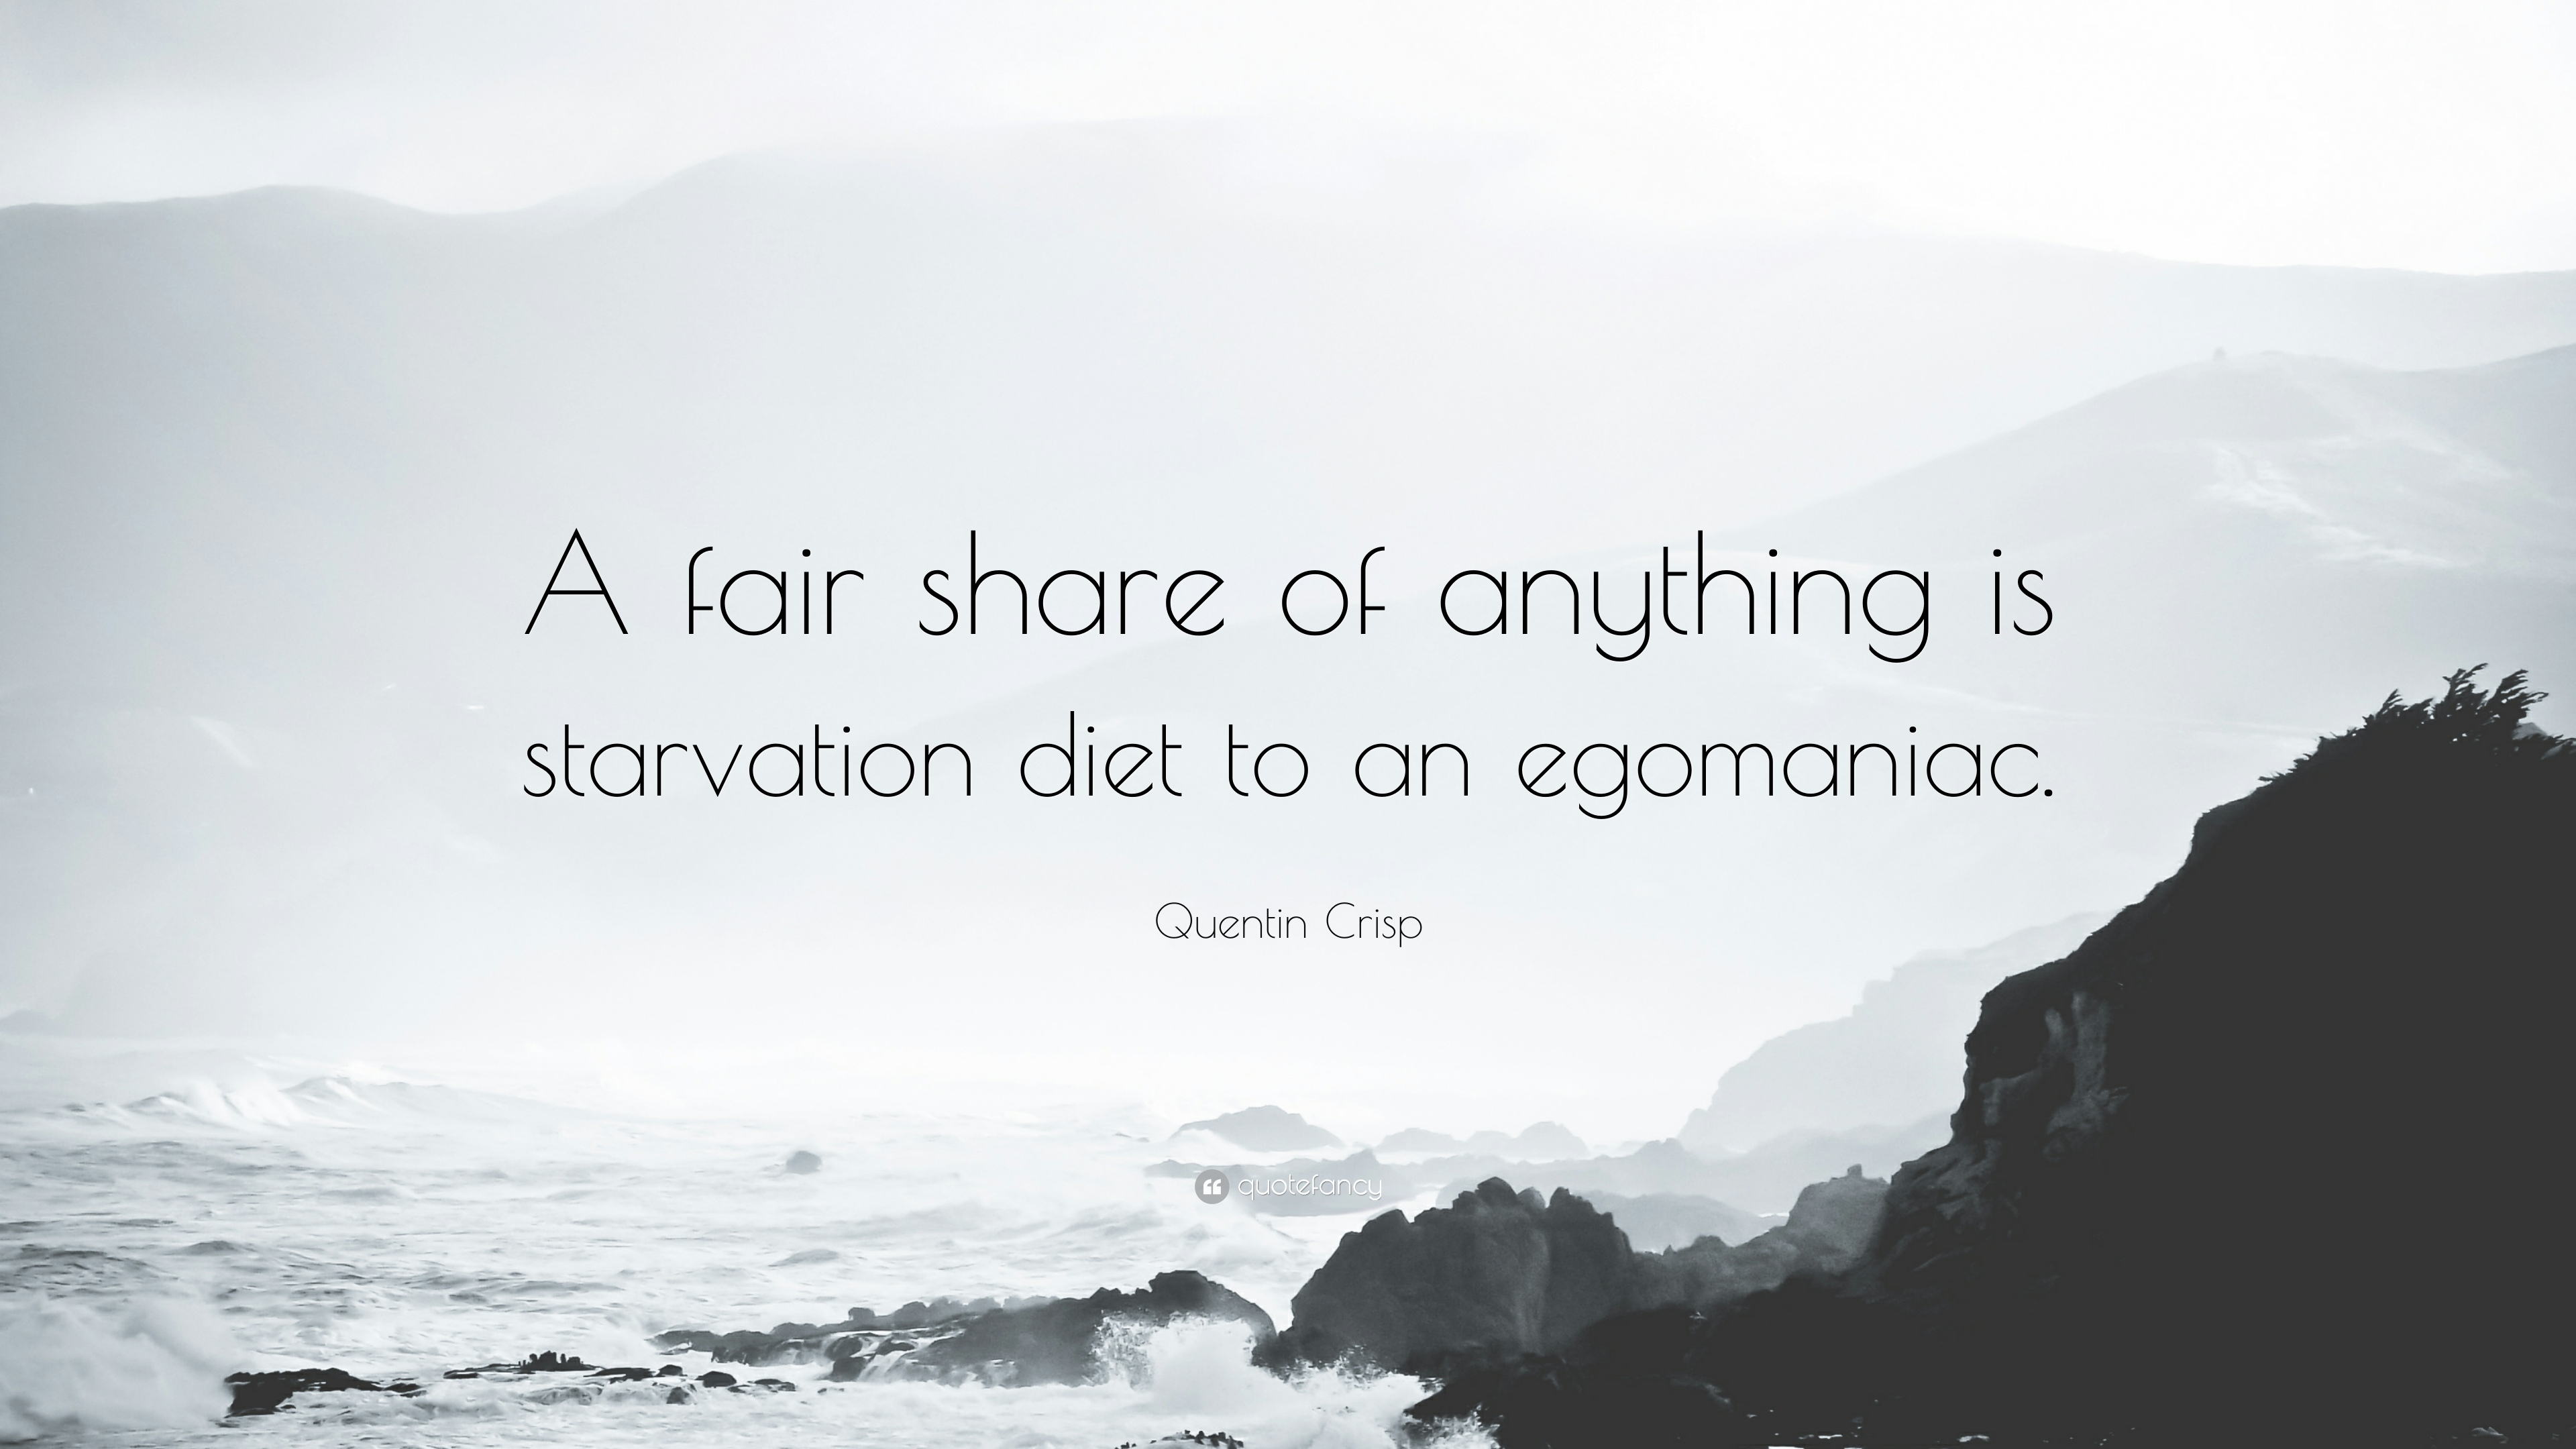 A fair share of anything is starvation diet to an egomaniac